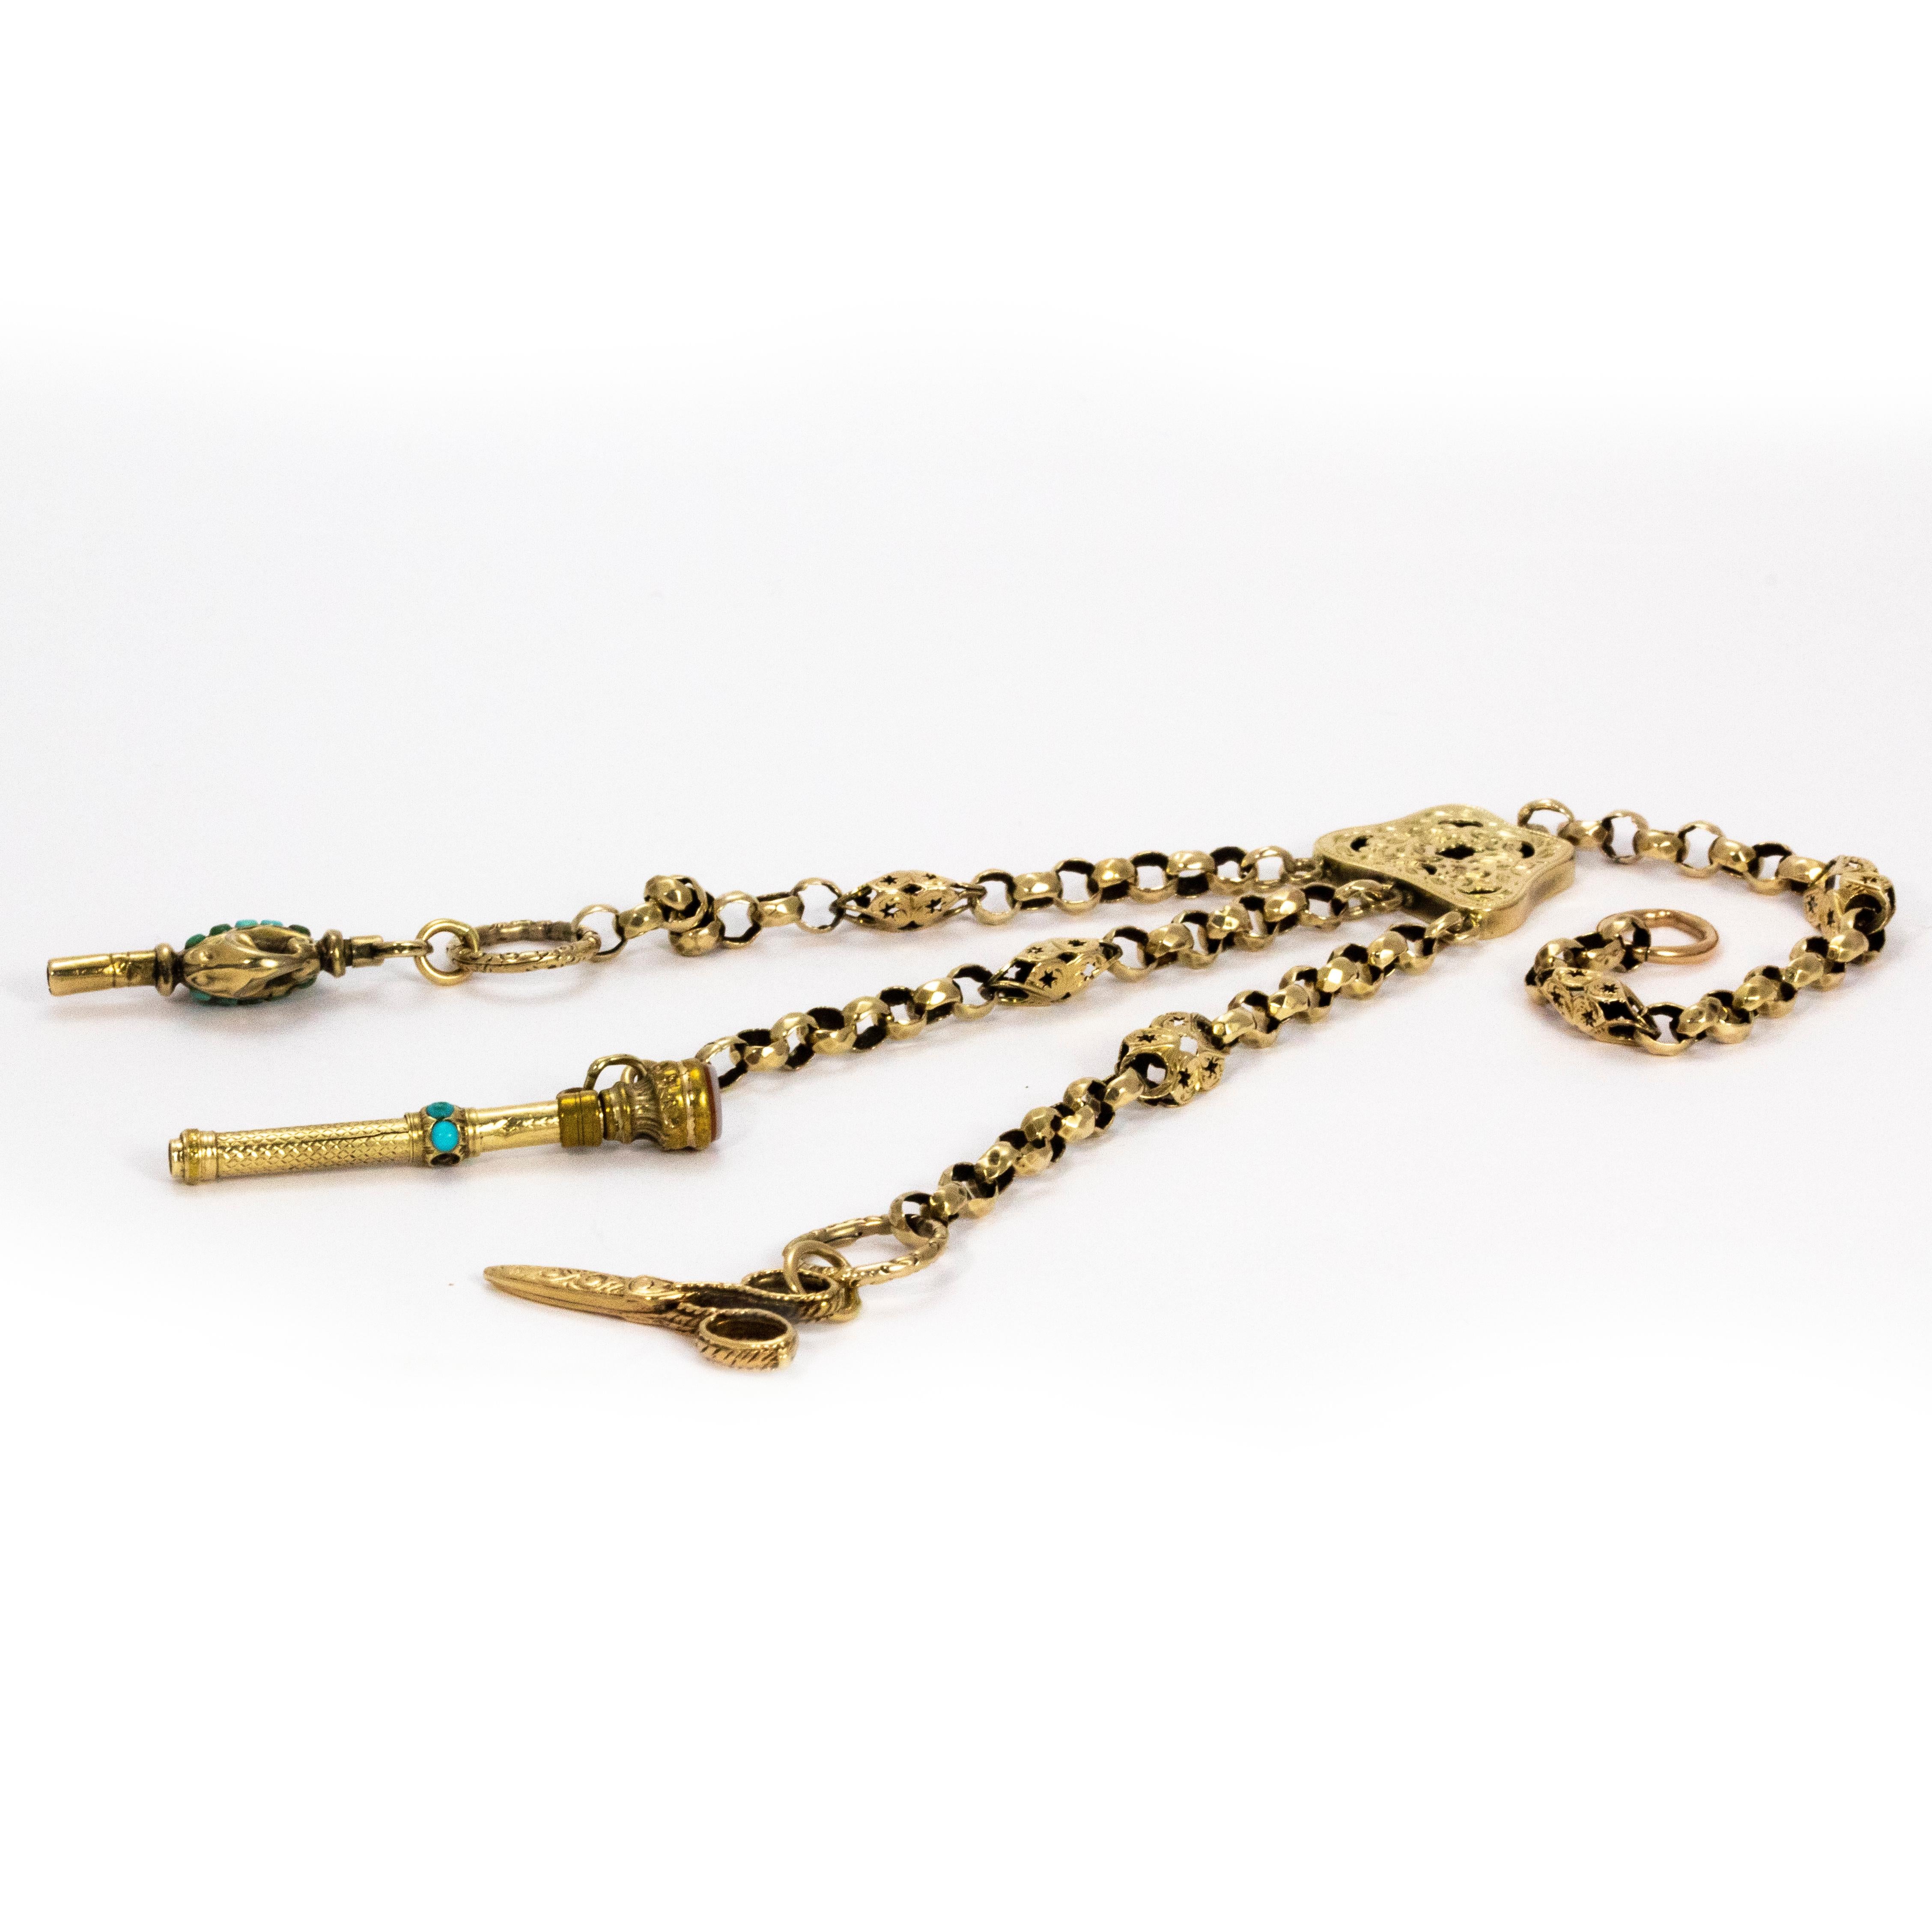 What a stunning piece! A wonderful example of a victorian chatelaine chain made with 9ct gold and decorated with turquoise. Two of the lengths of the chain hold charming details, one being a pair of scissors and the other a key. The whole chain